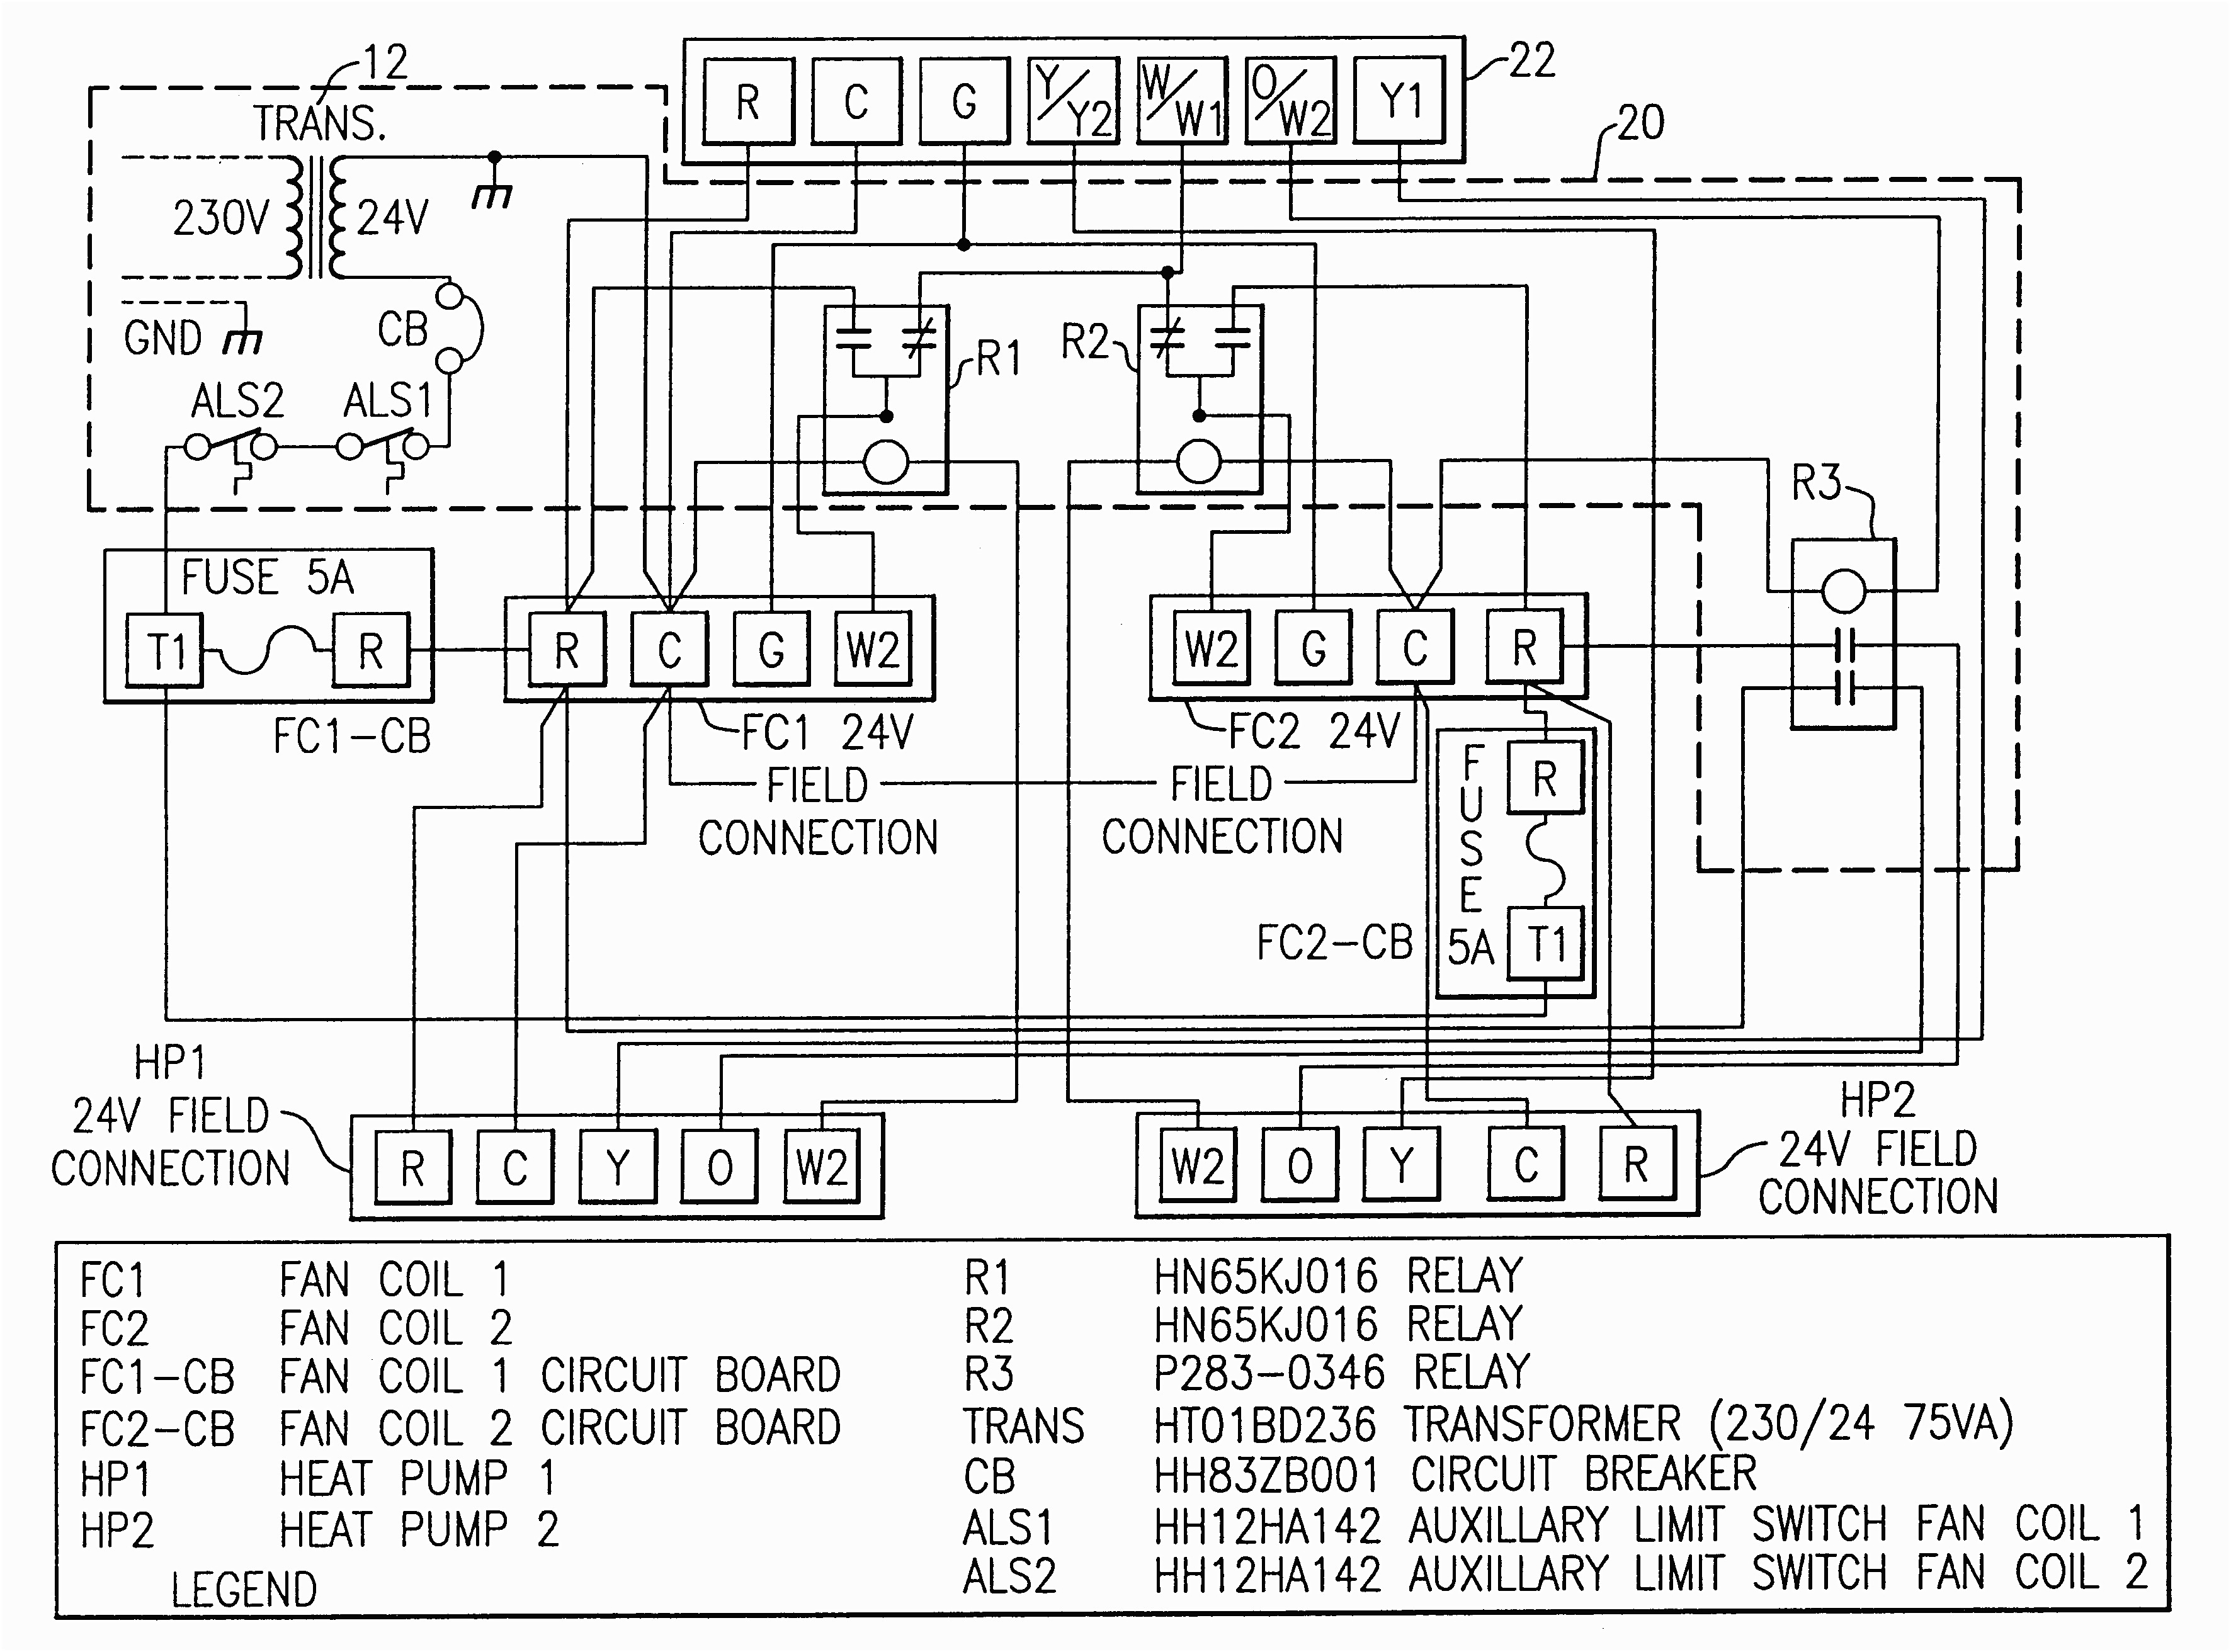 Wiring Diagram Of Carrier Air Conditioner - Great Installation Of - Carrier Air Conditioner Wiring Diagram